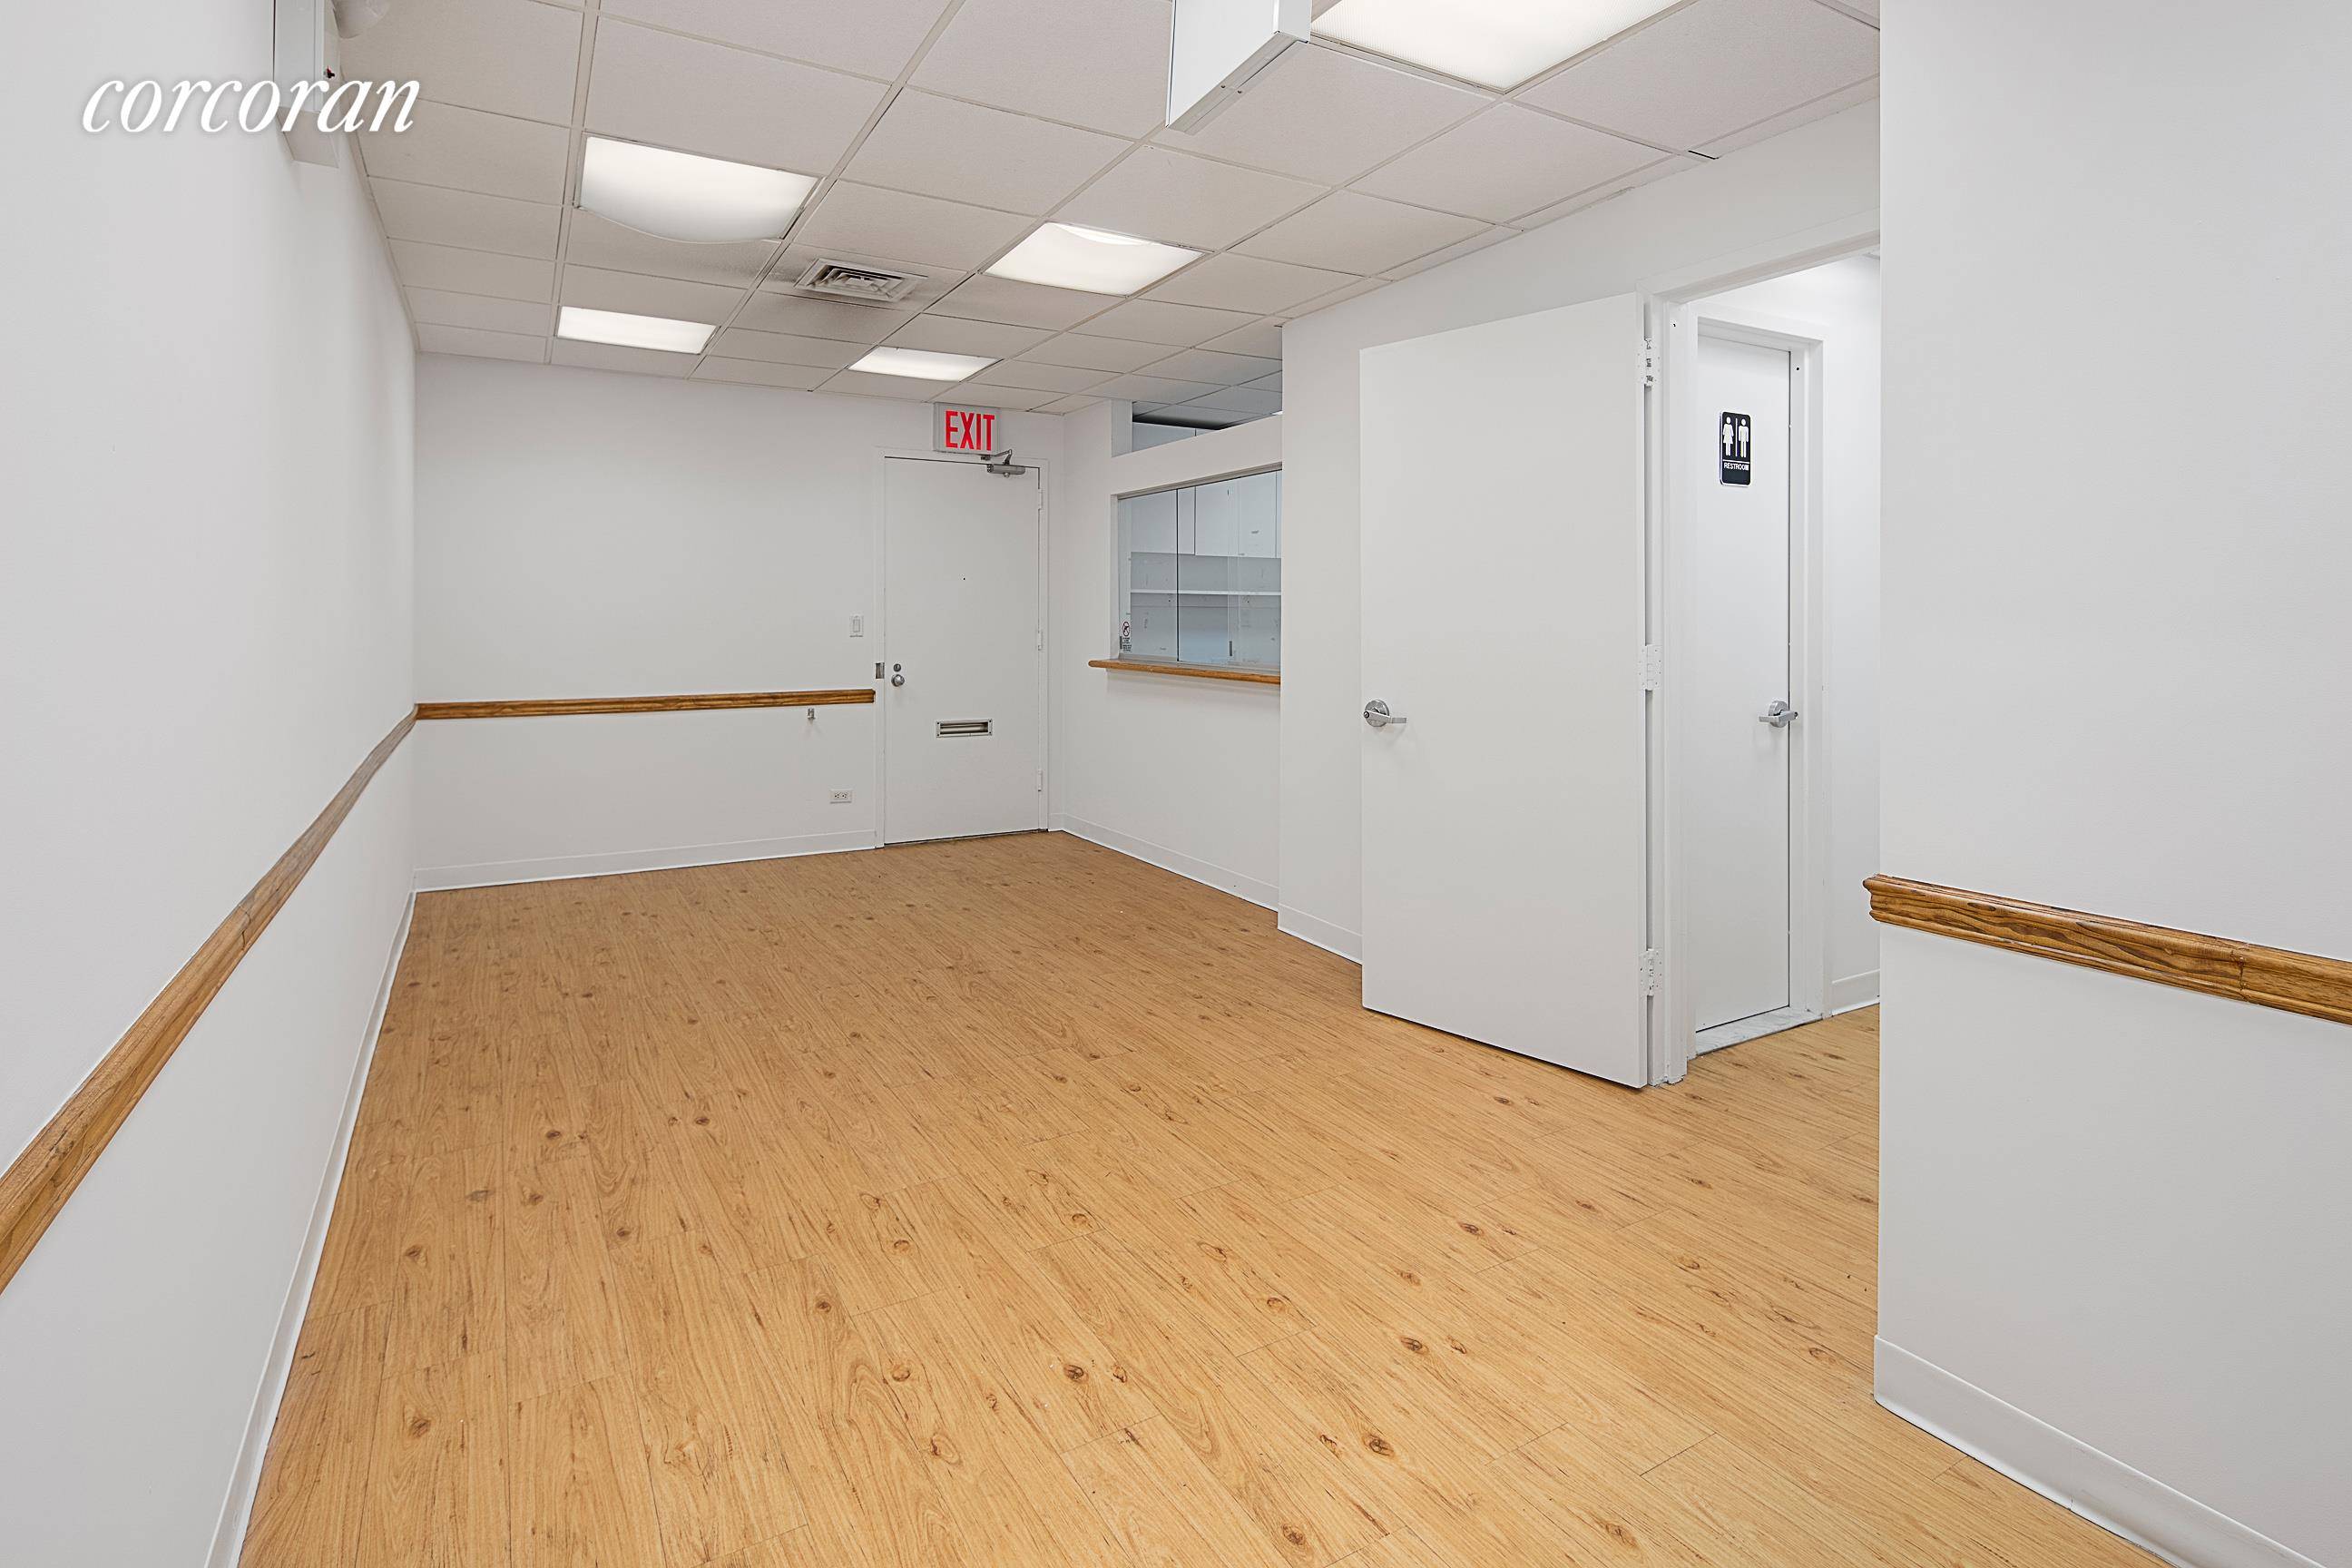 345 East 37th Street, 201 is a Midtown East pristine turn key medical office located at The Corinthian, a full service condo building with an elegant lobby and doorman.